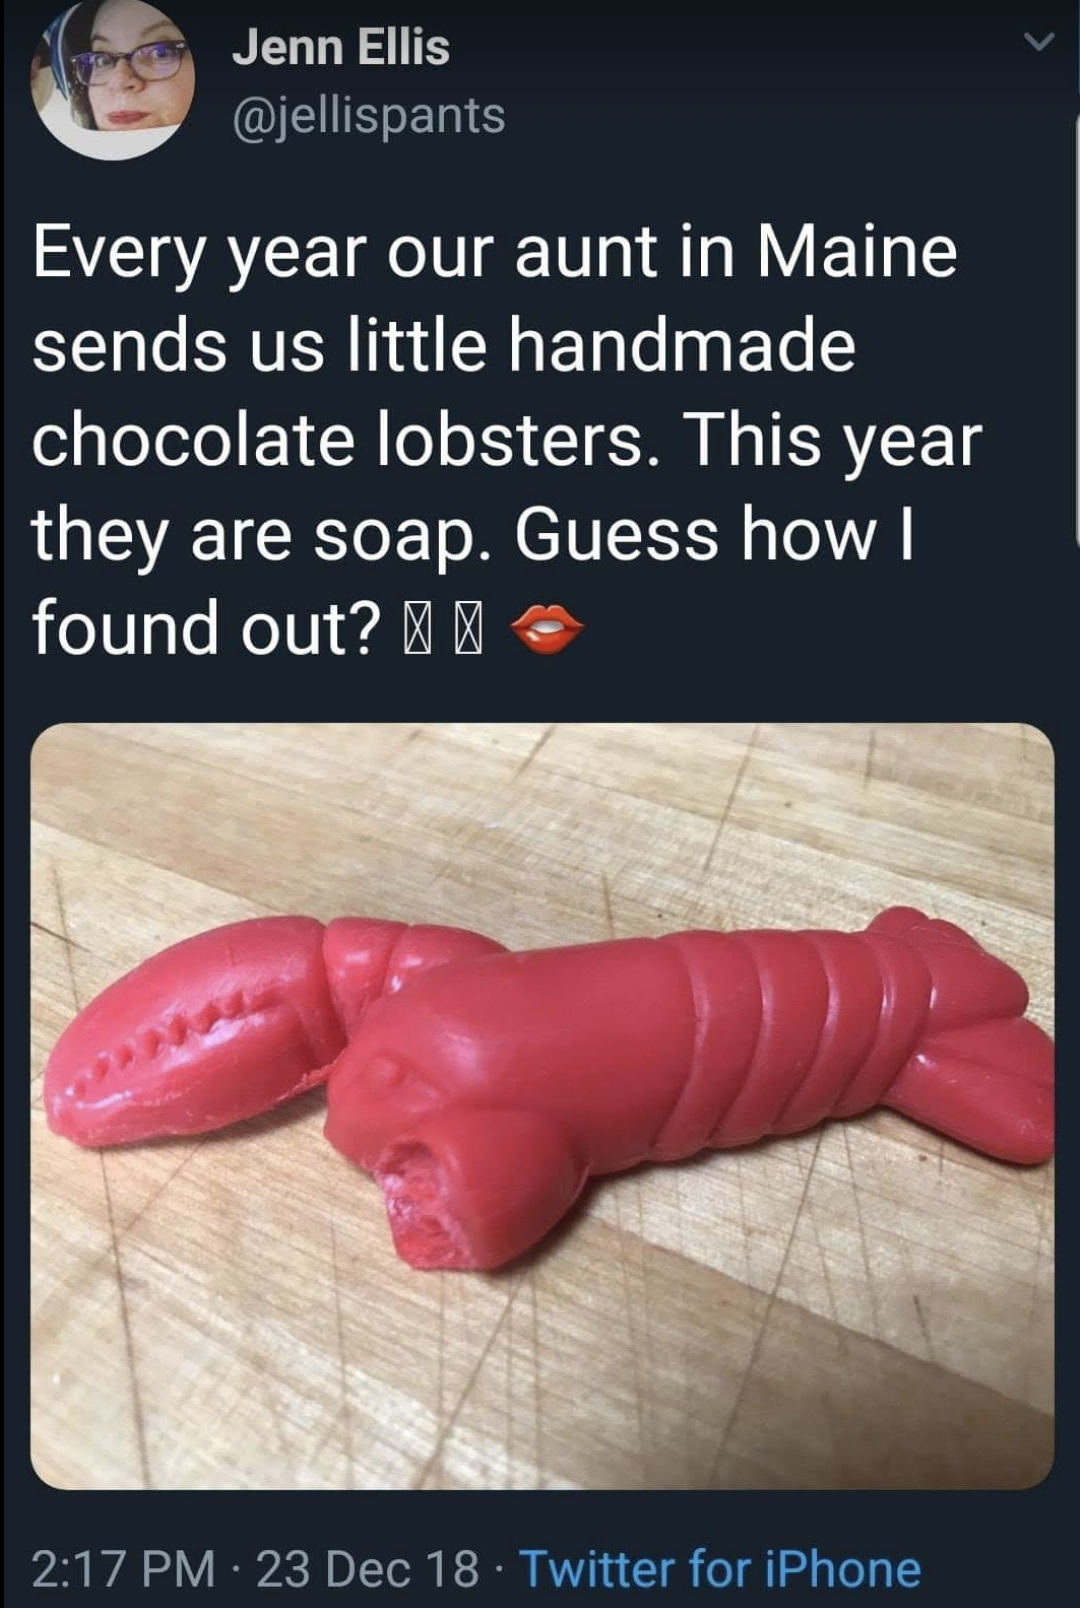 chocolate lobster soap - Jenn Ellis Every year our aunt in Maine sends us little handmade chocolate lobsters. This year they are soap. Guess how | found out? 23 Dec 18. Twitter for iPhone